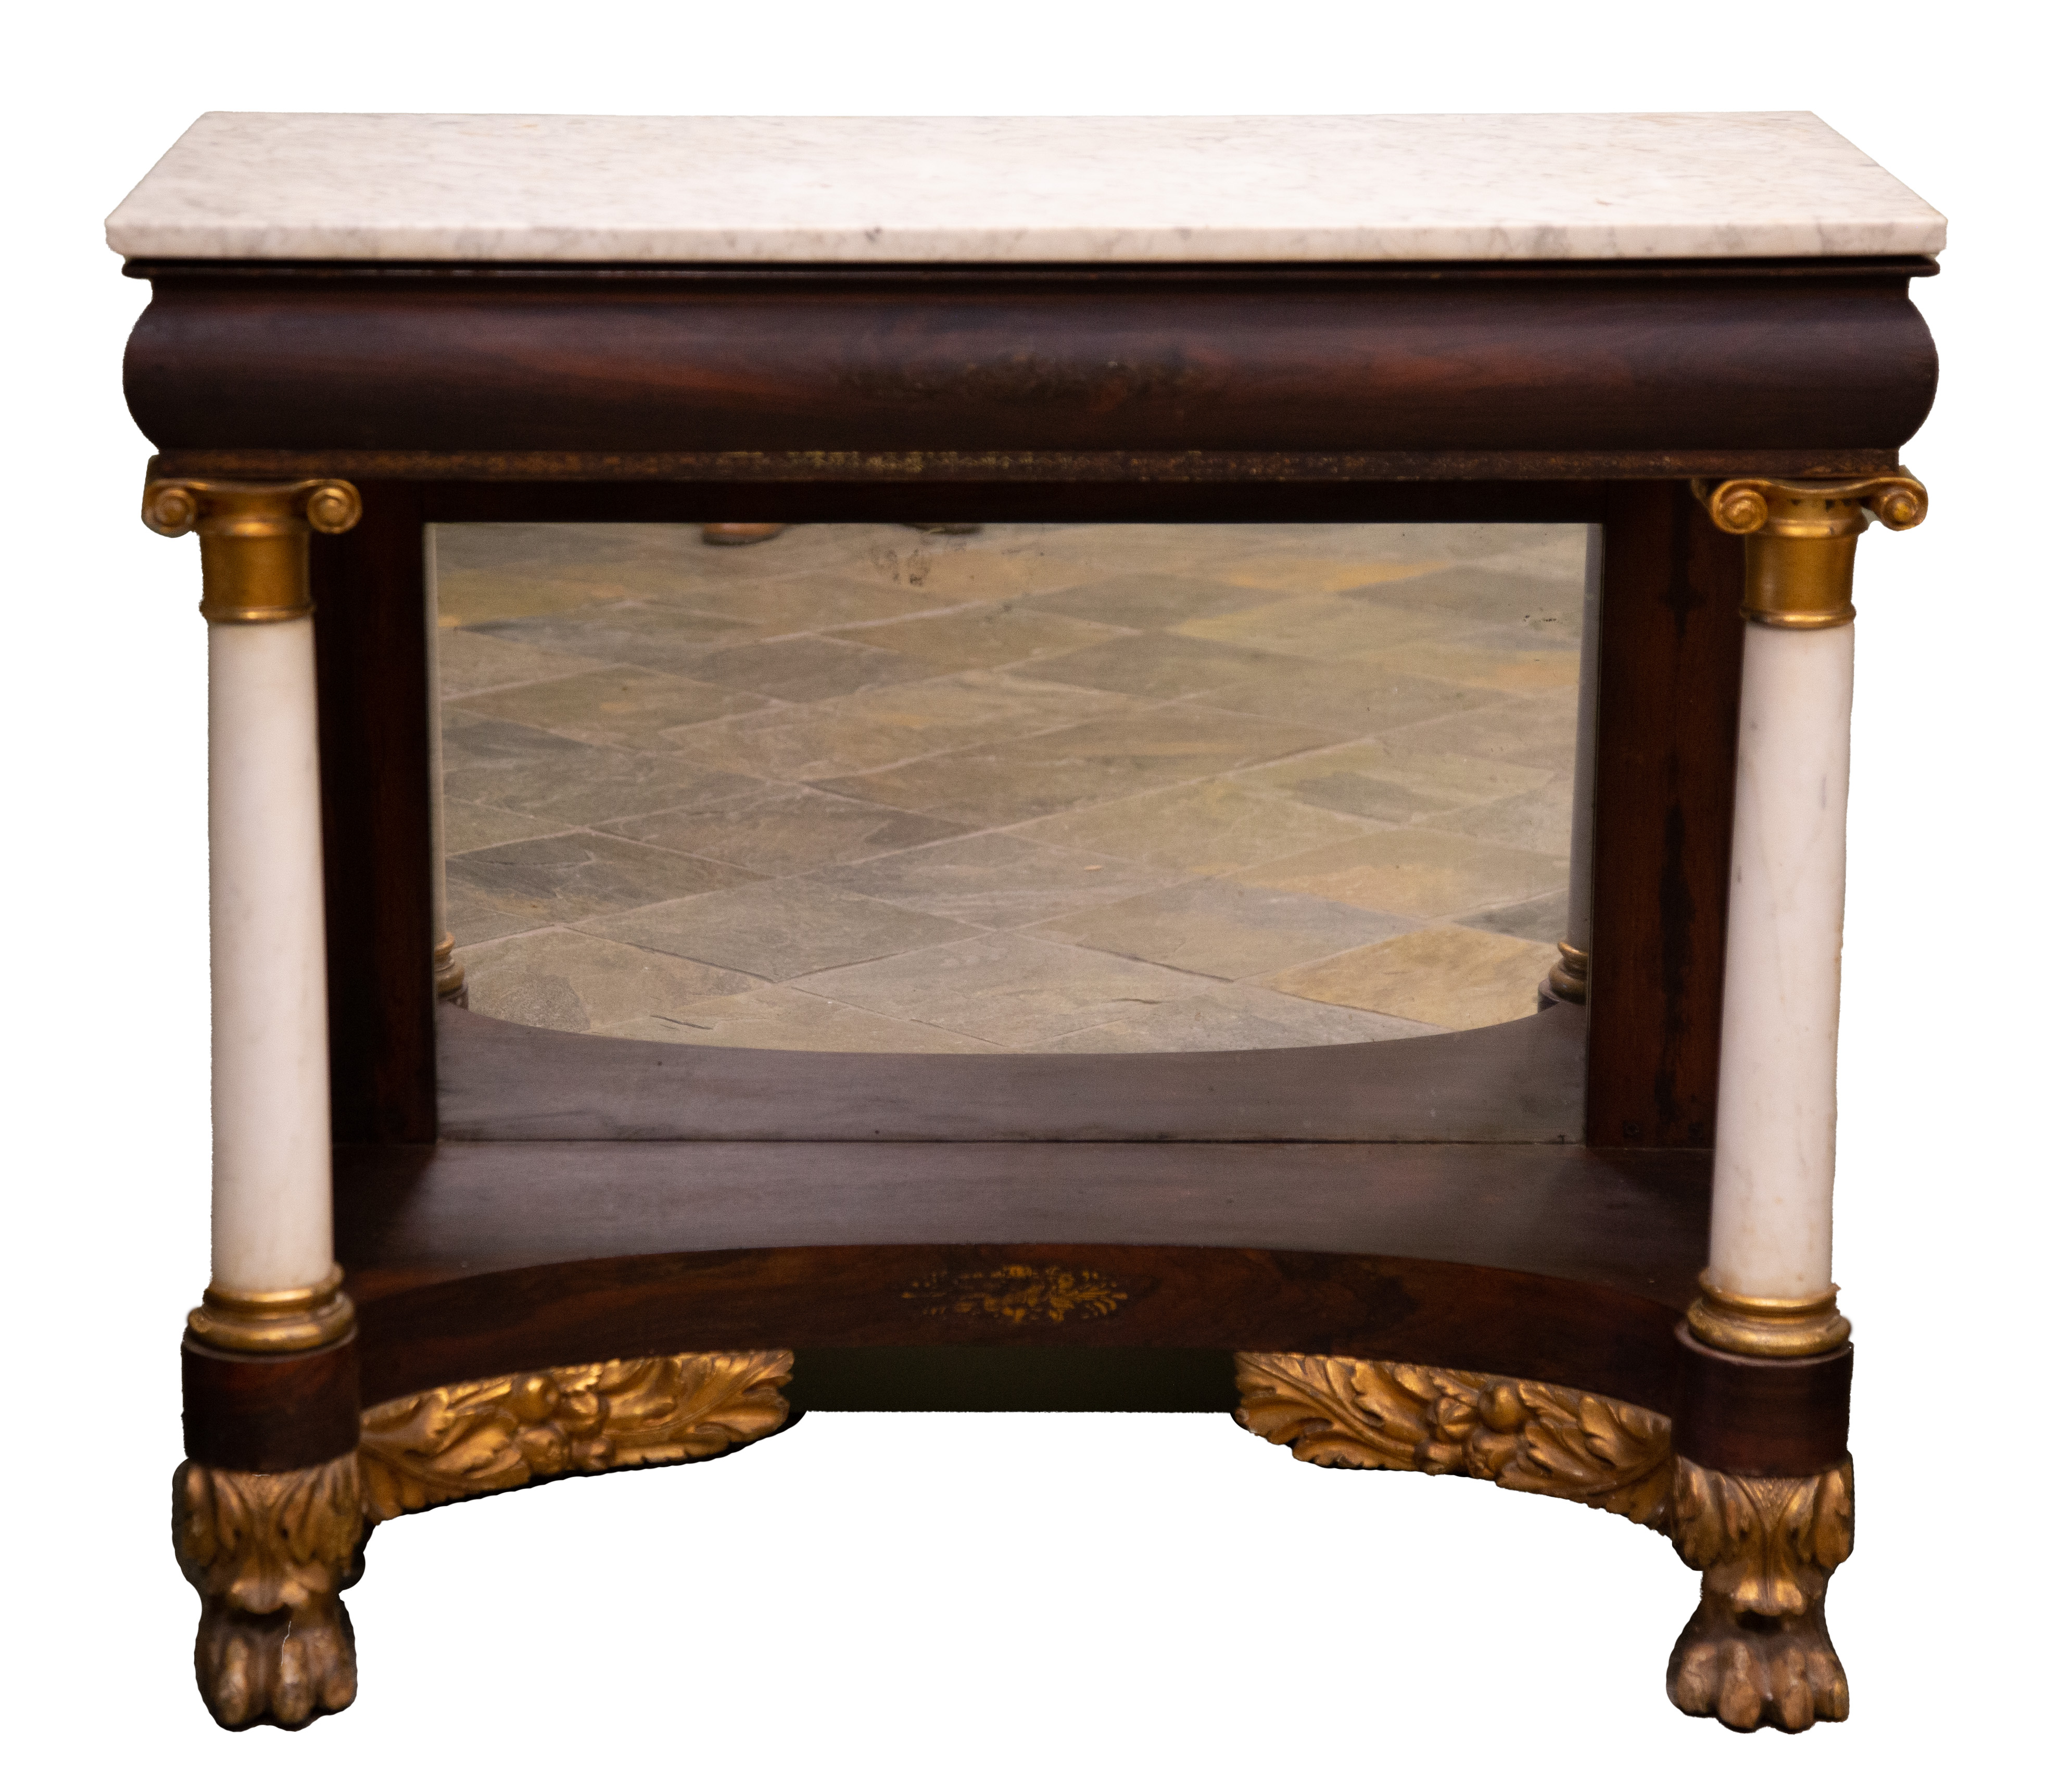 EMPIRE PIER TABLE Early 19th century  2c8712